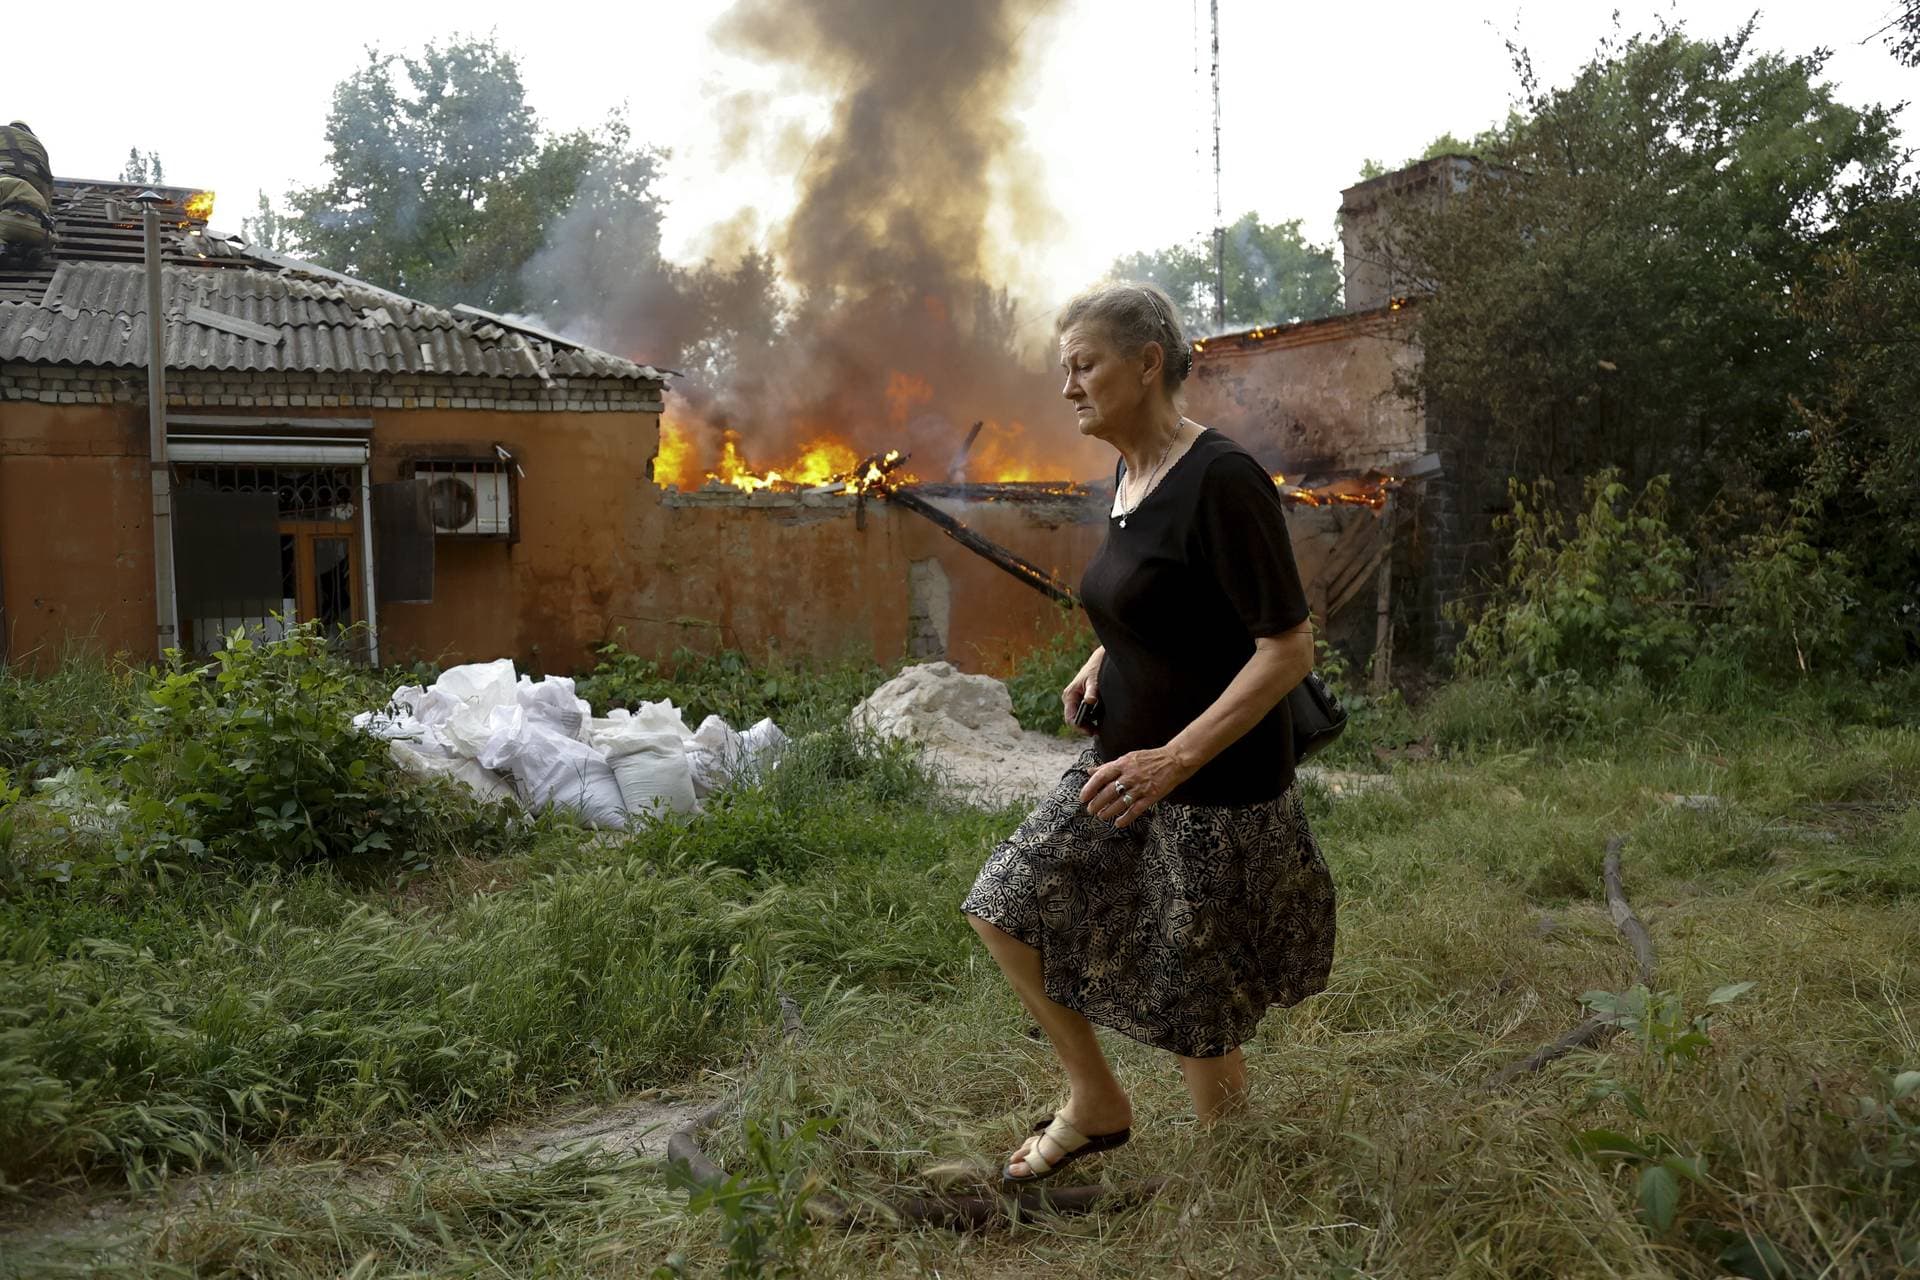 A woman runs from a house that's on fire after shelling in Donetsk